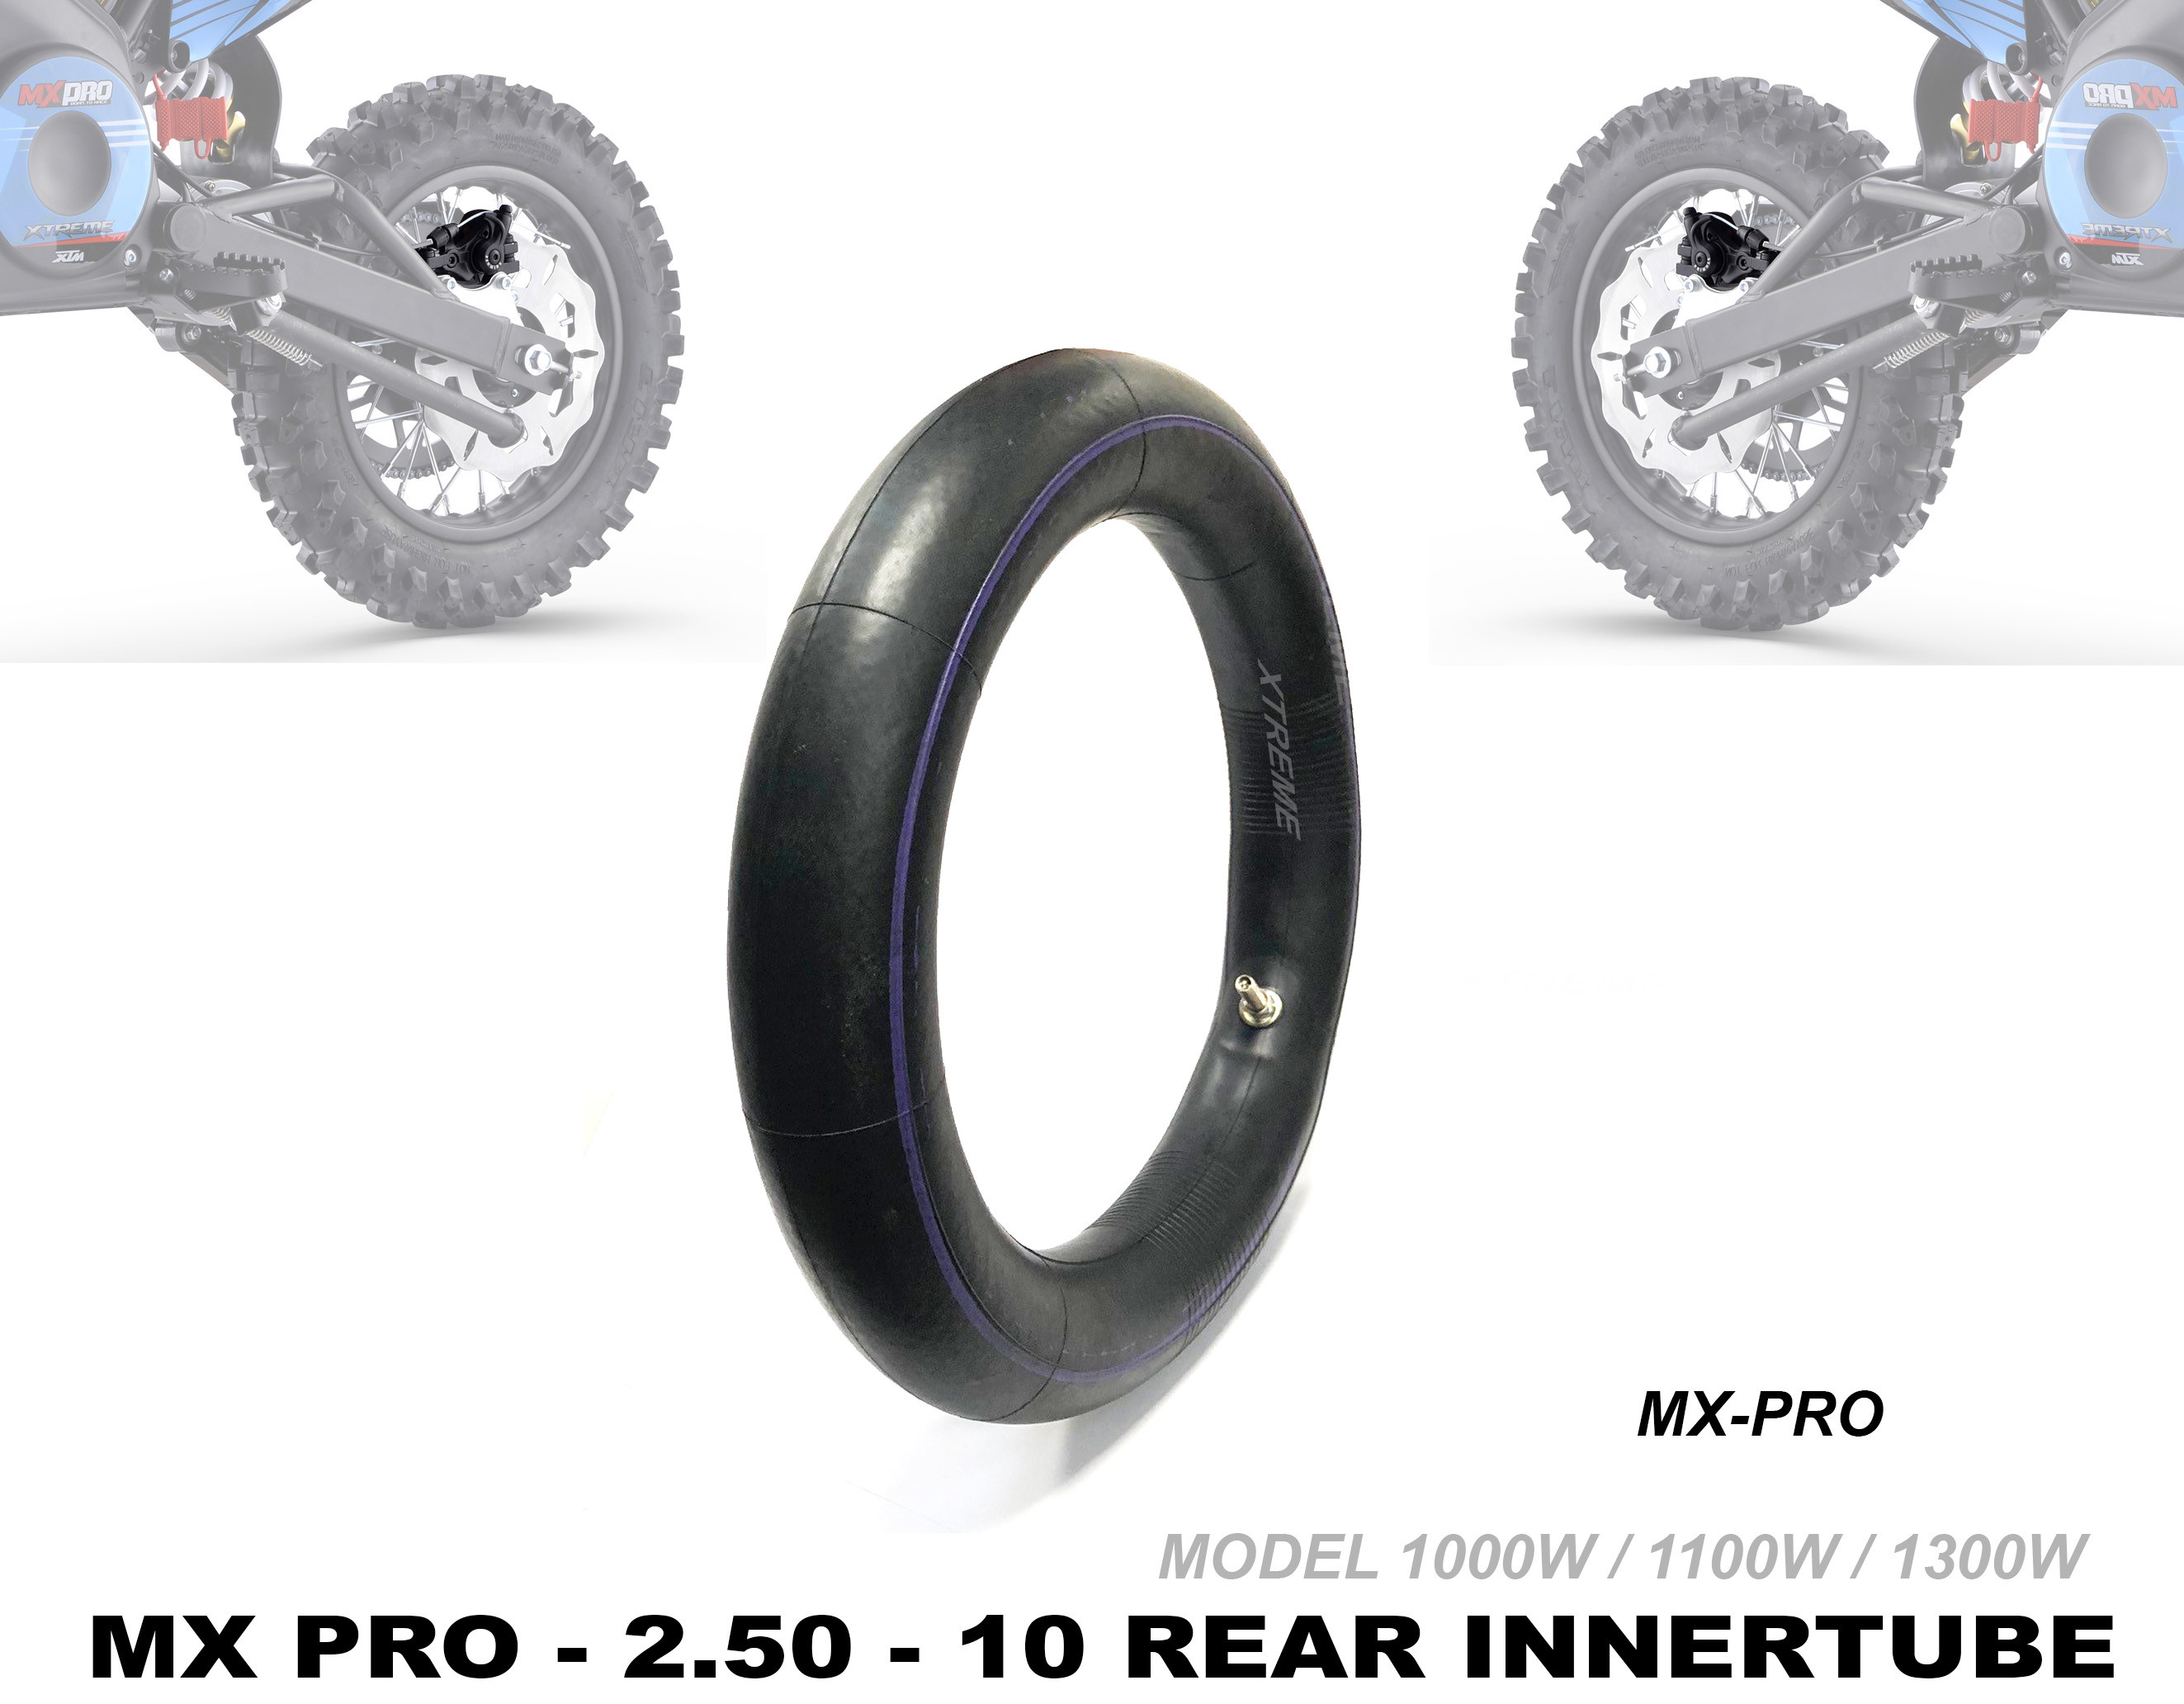 XTREME ELECTRIC XTM MX-PRO 36V REPLACEMENT REAR INNER TUBE 80/100-10 